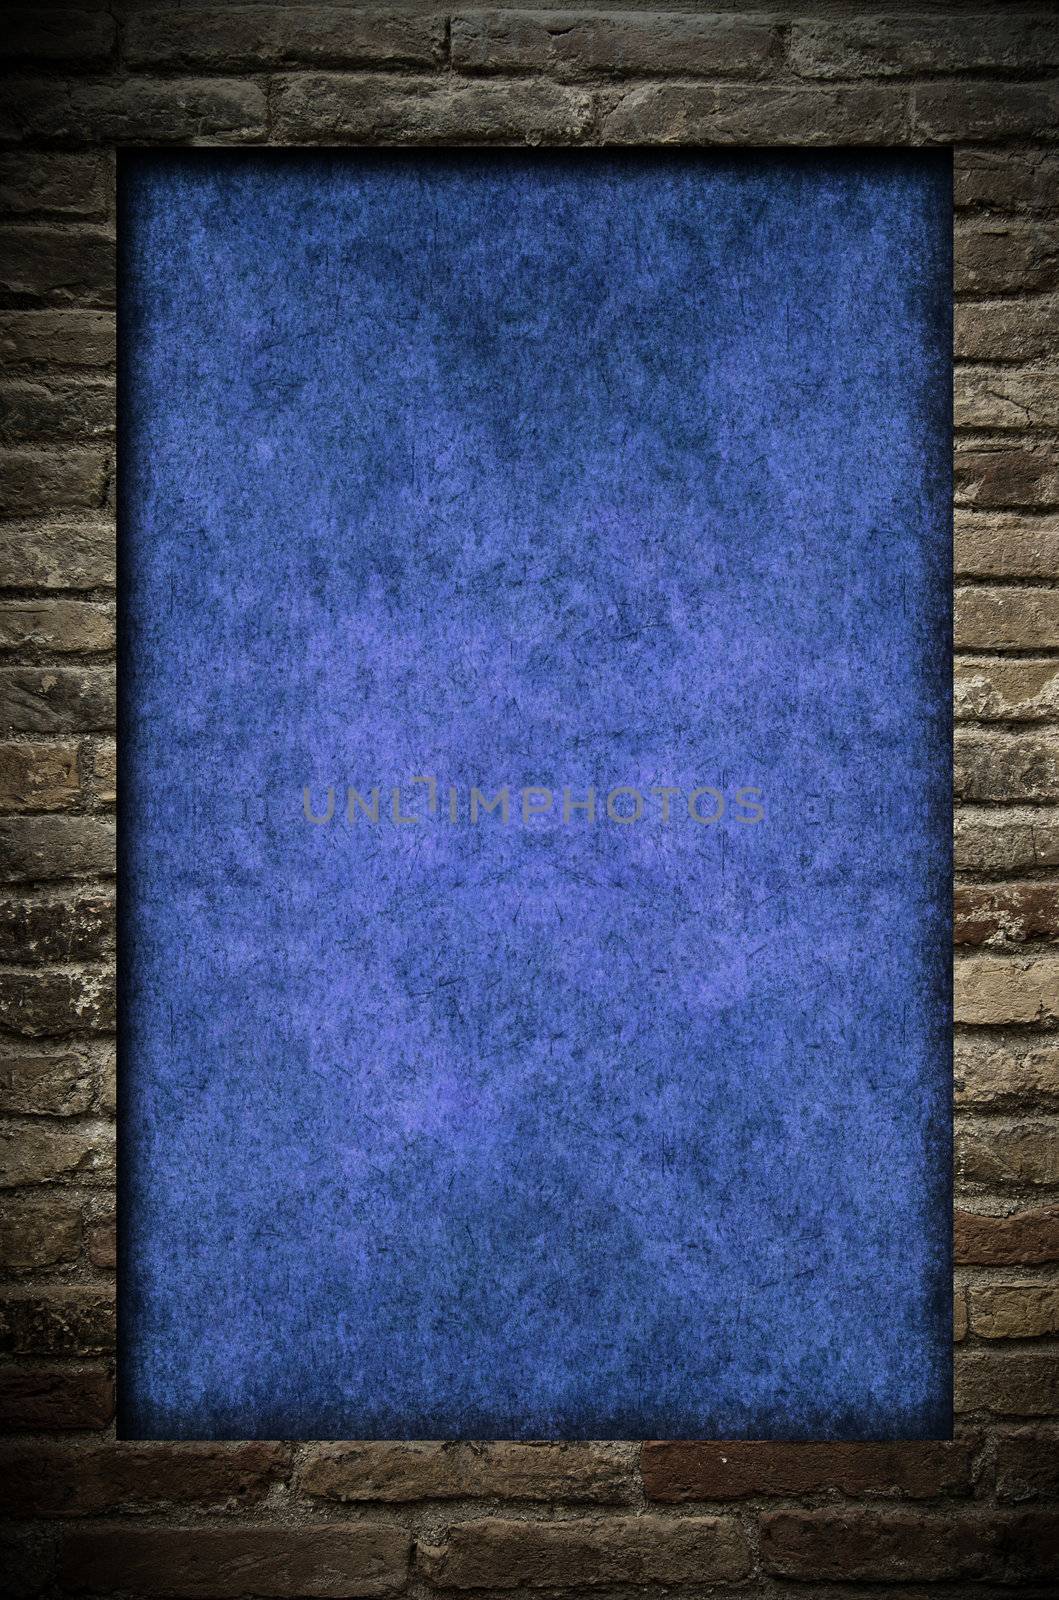 Grunge blue paper in a brick wall frame